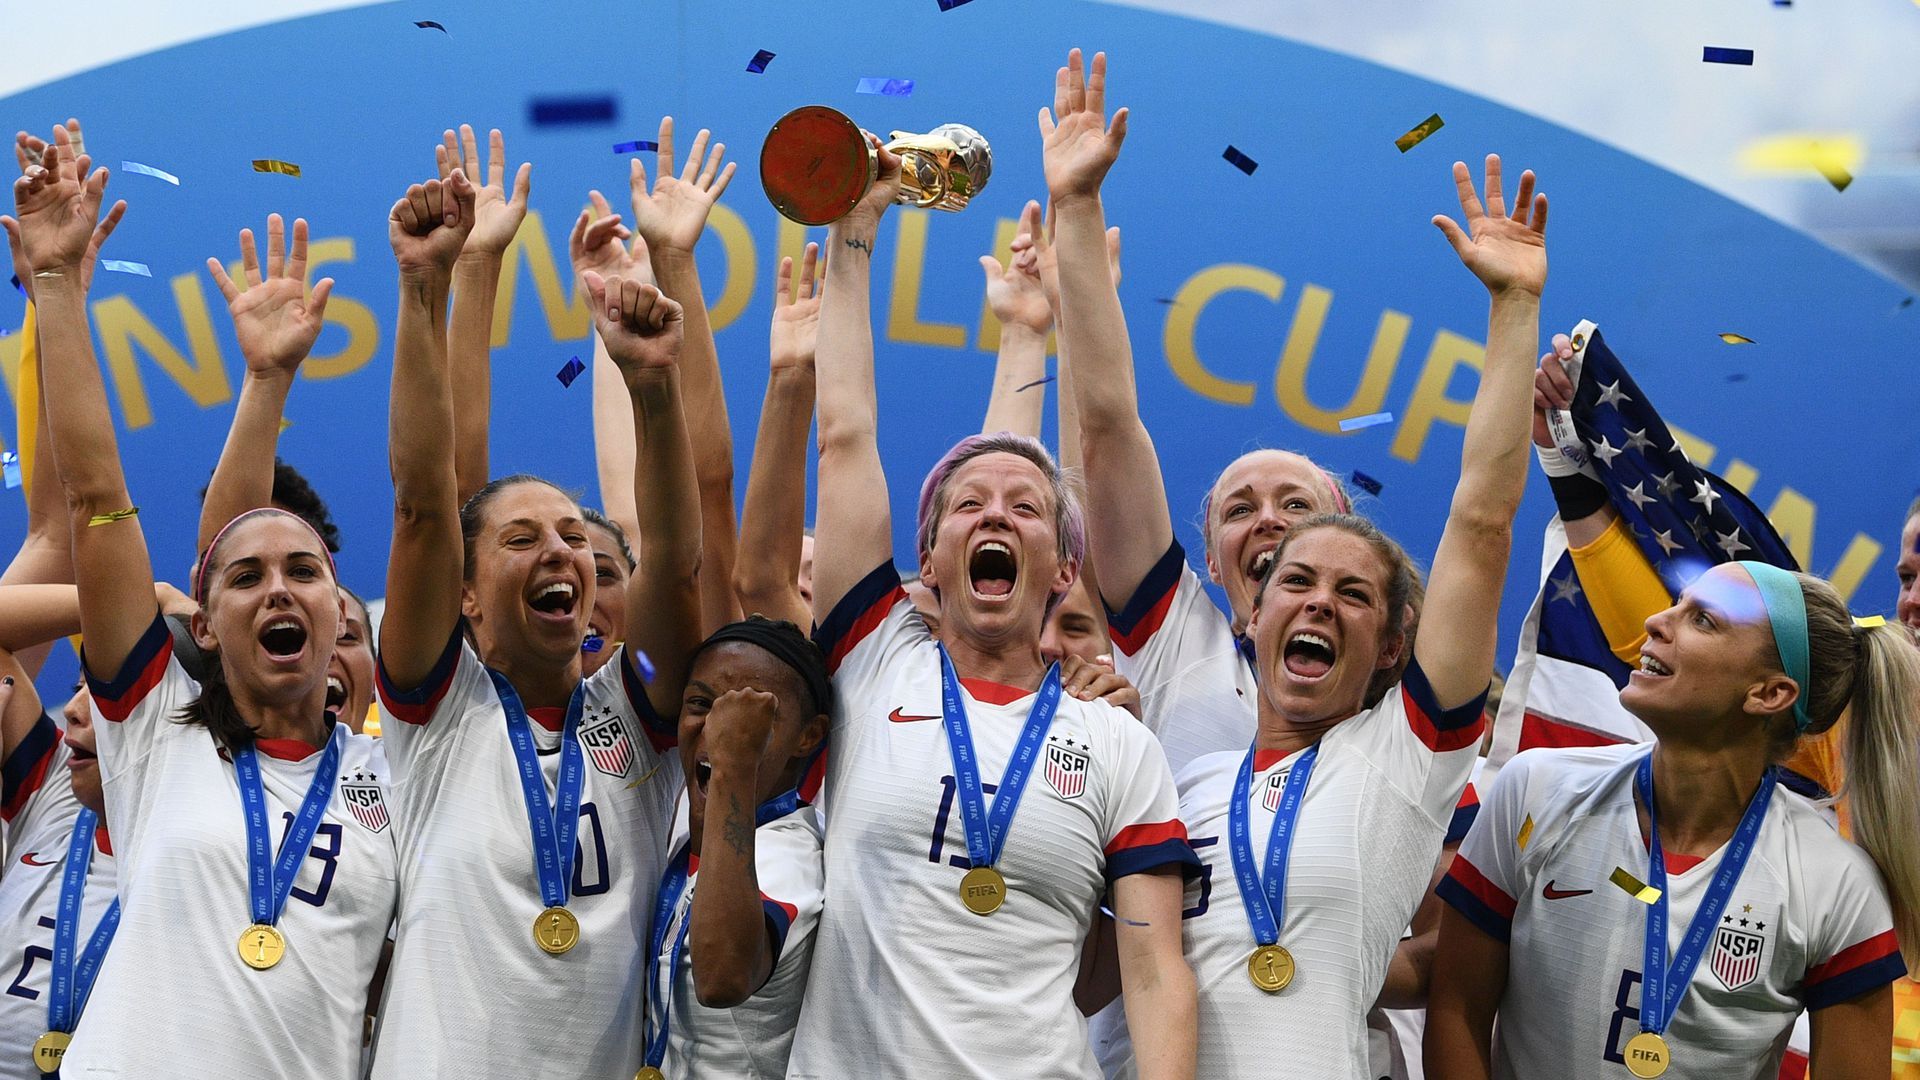 The U.S. players with their 4th World Cup in Lyon, central-eastern France.